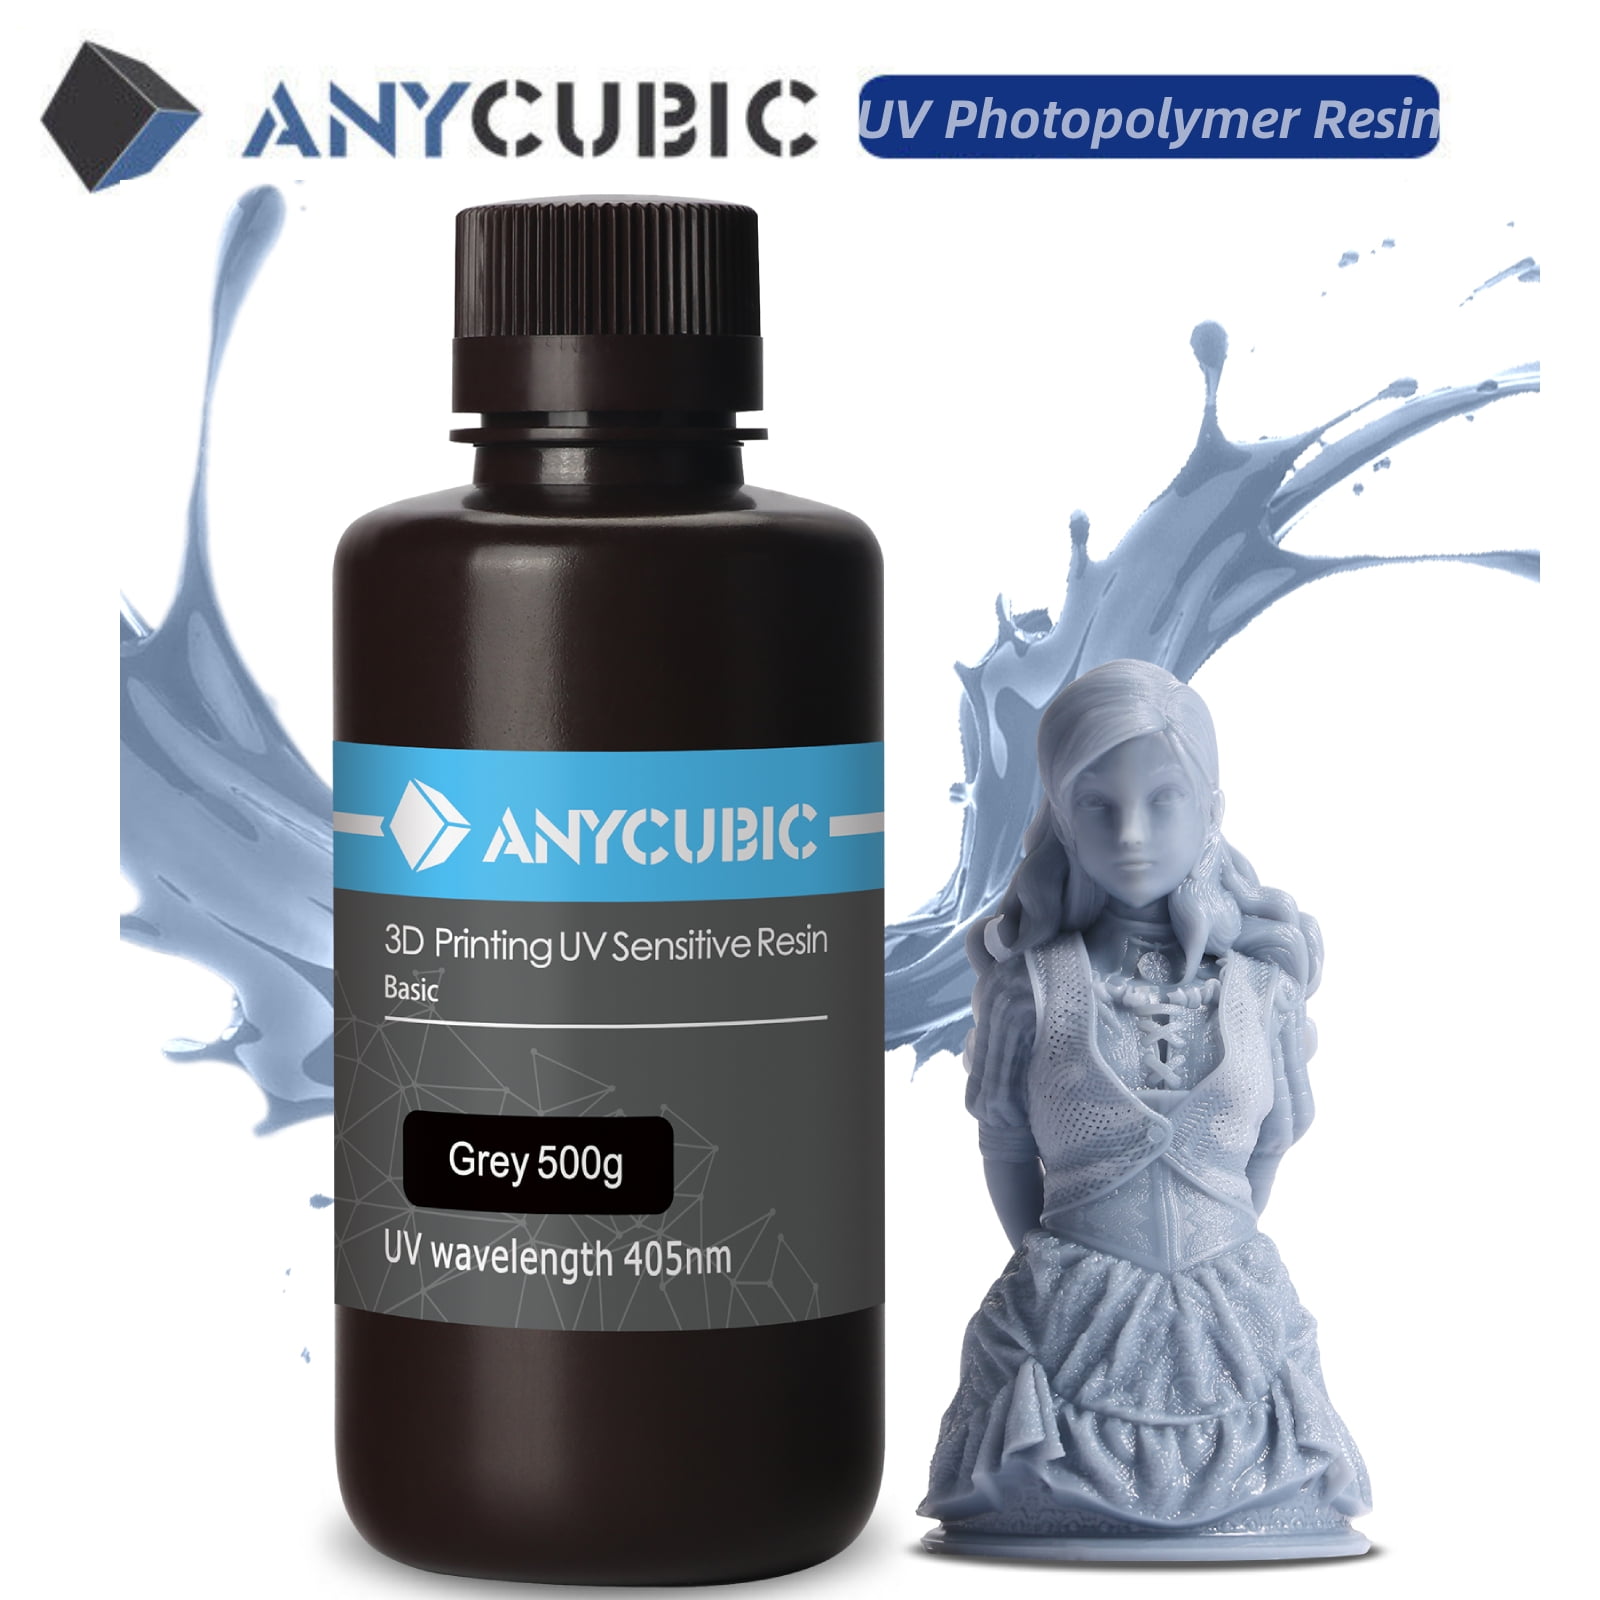 Buy 3 Pay 2】ANYCUBIC 500G/1KG ECO UV Resin 405nm For LCD/SLA 3D